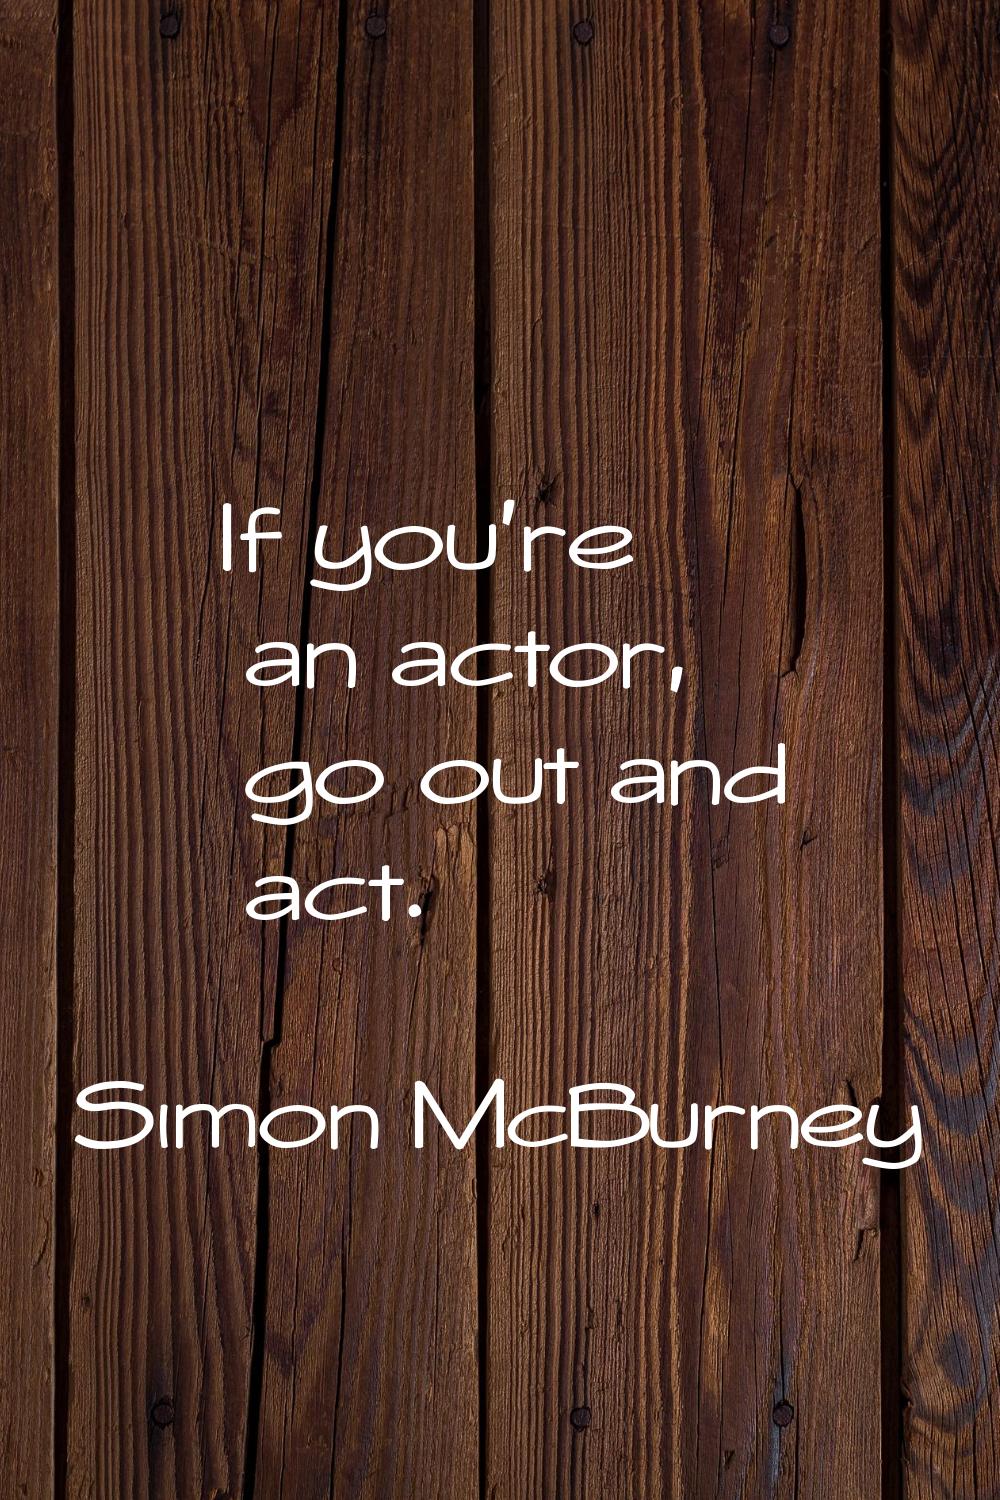 If you're an actor, go out and act.